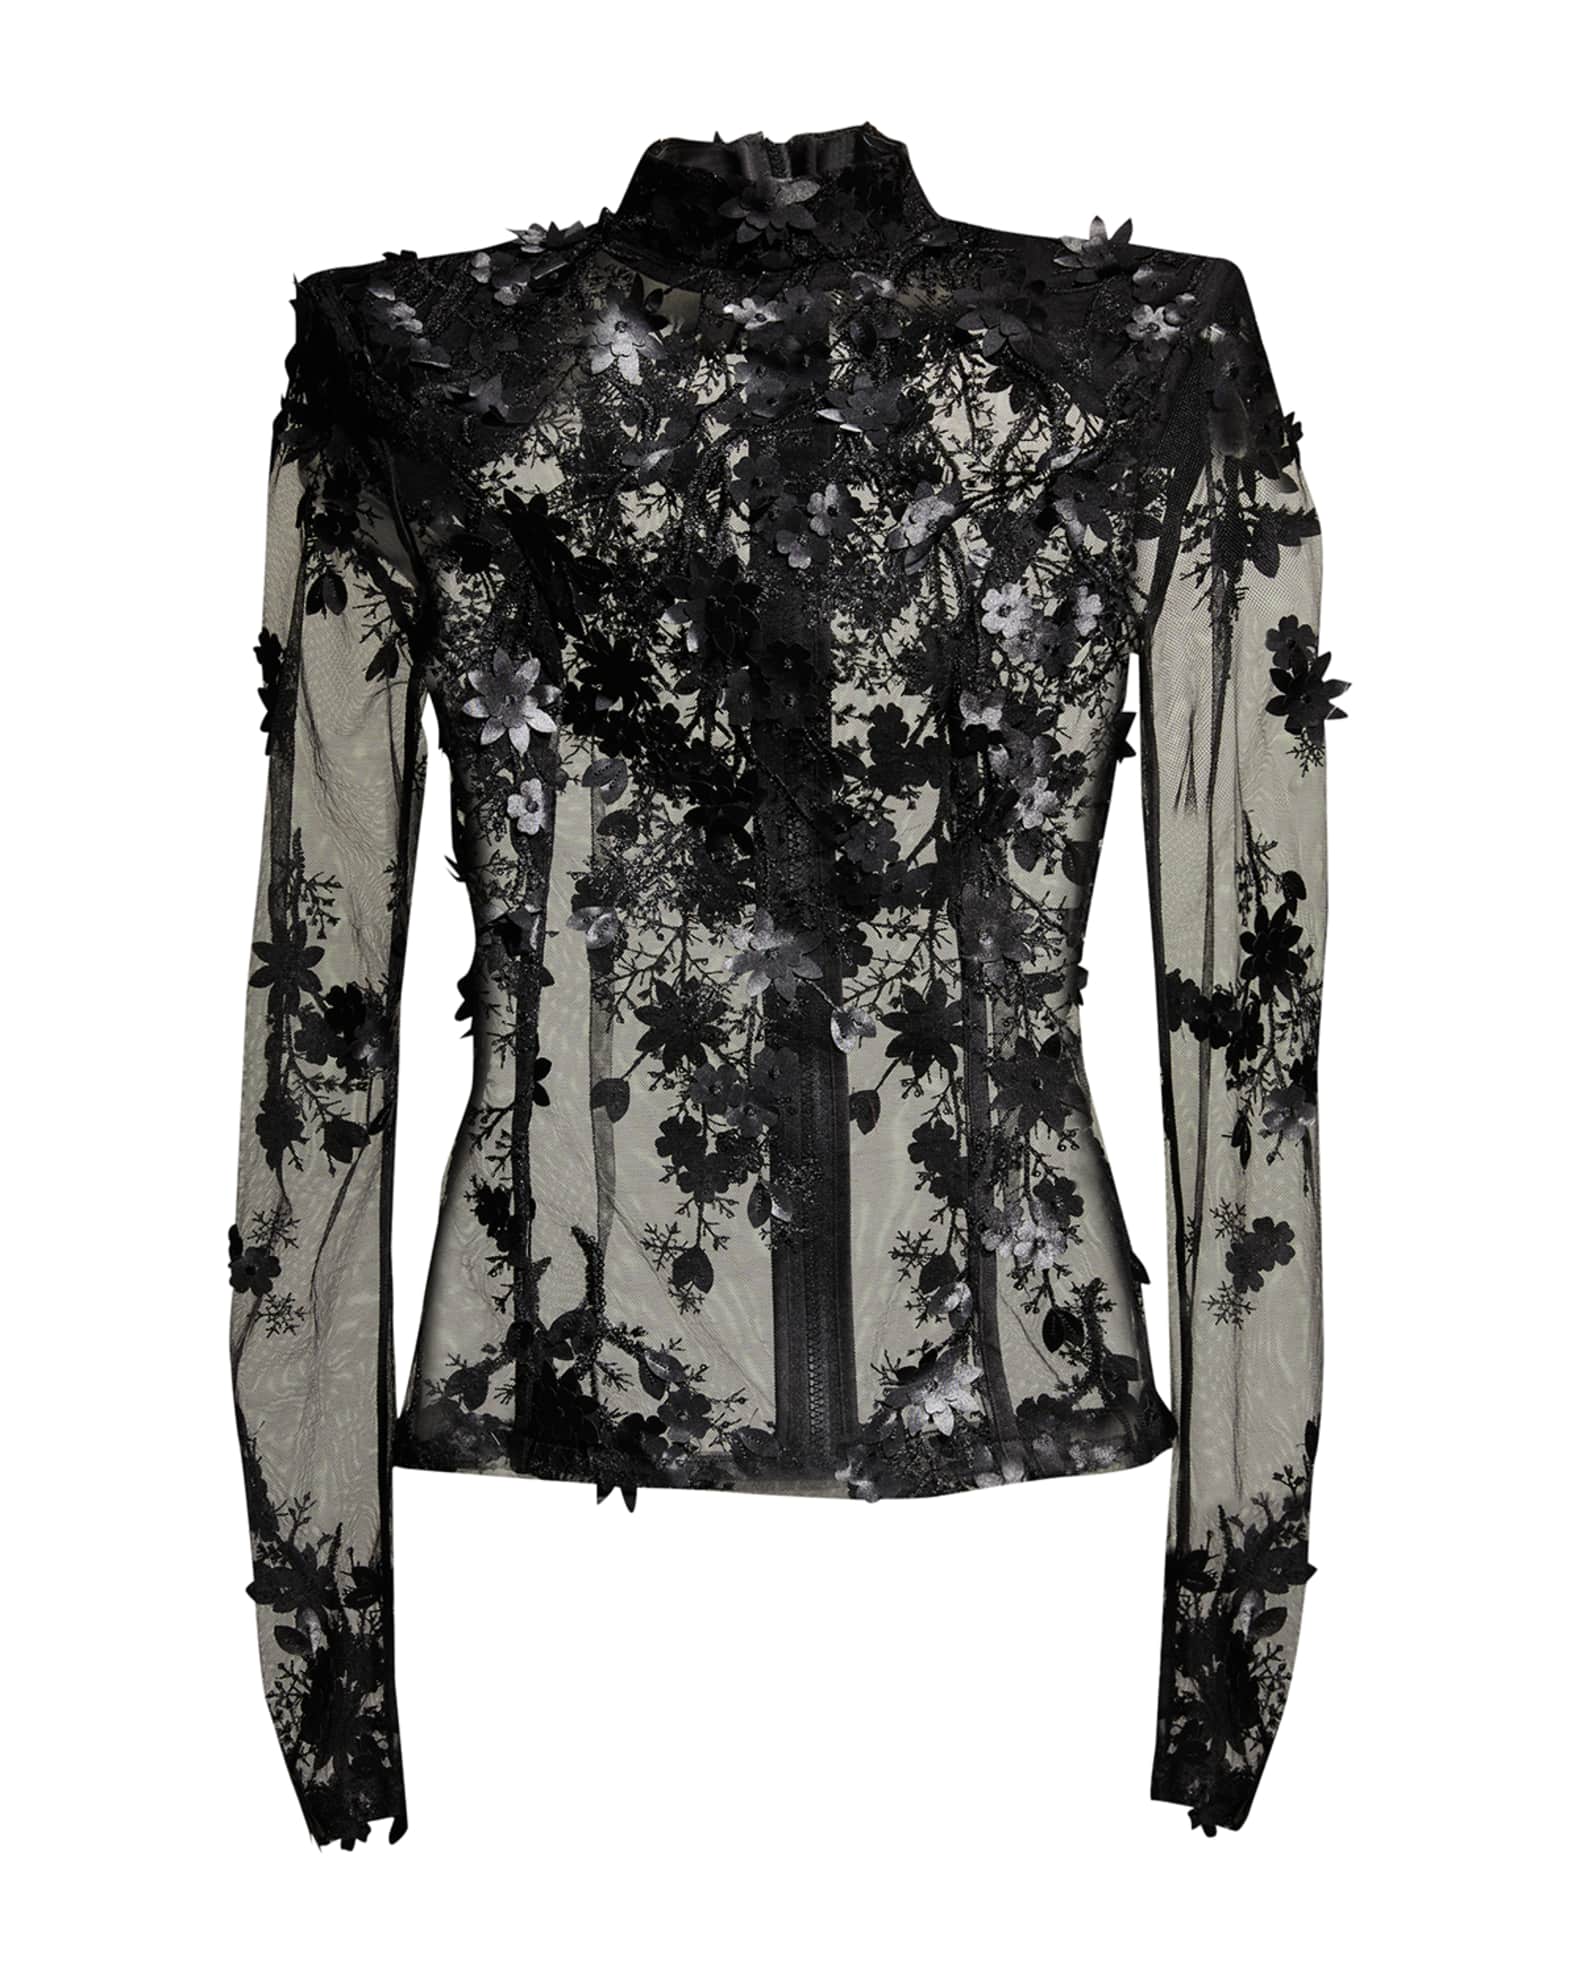 ZHIVAGO Mulwala Sheer Lace and Flower Applique Top | Neiman Marcus